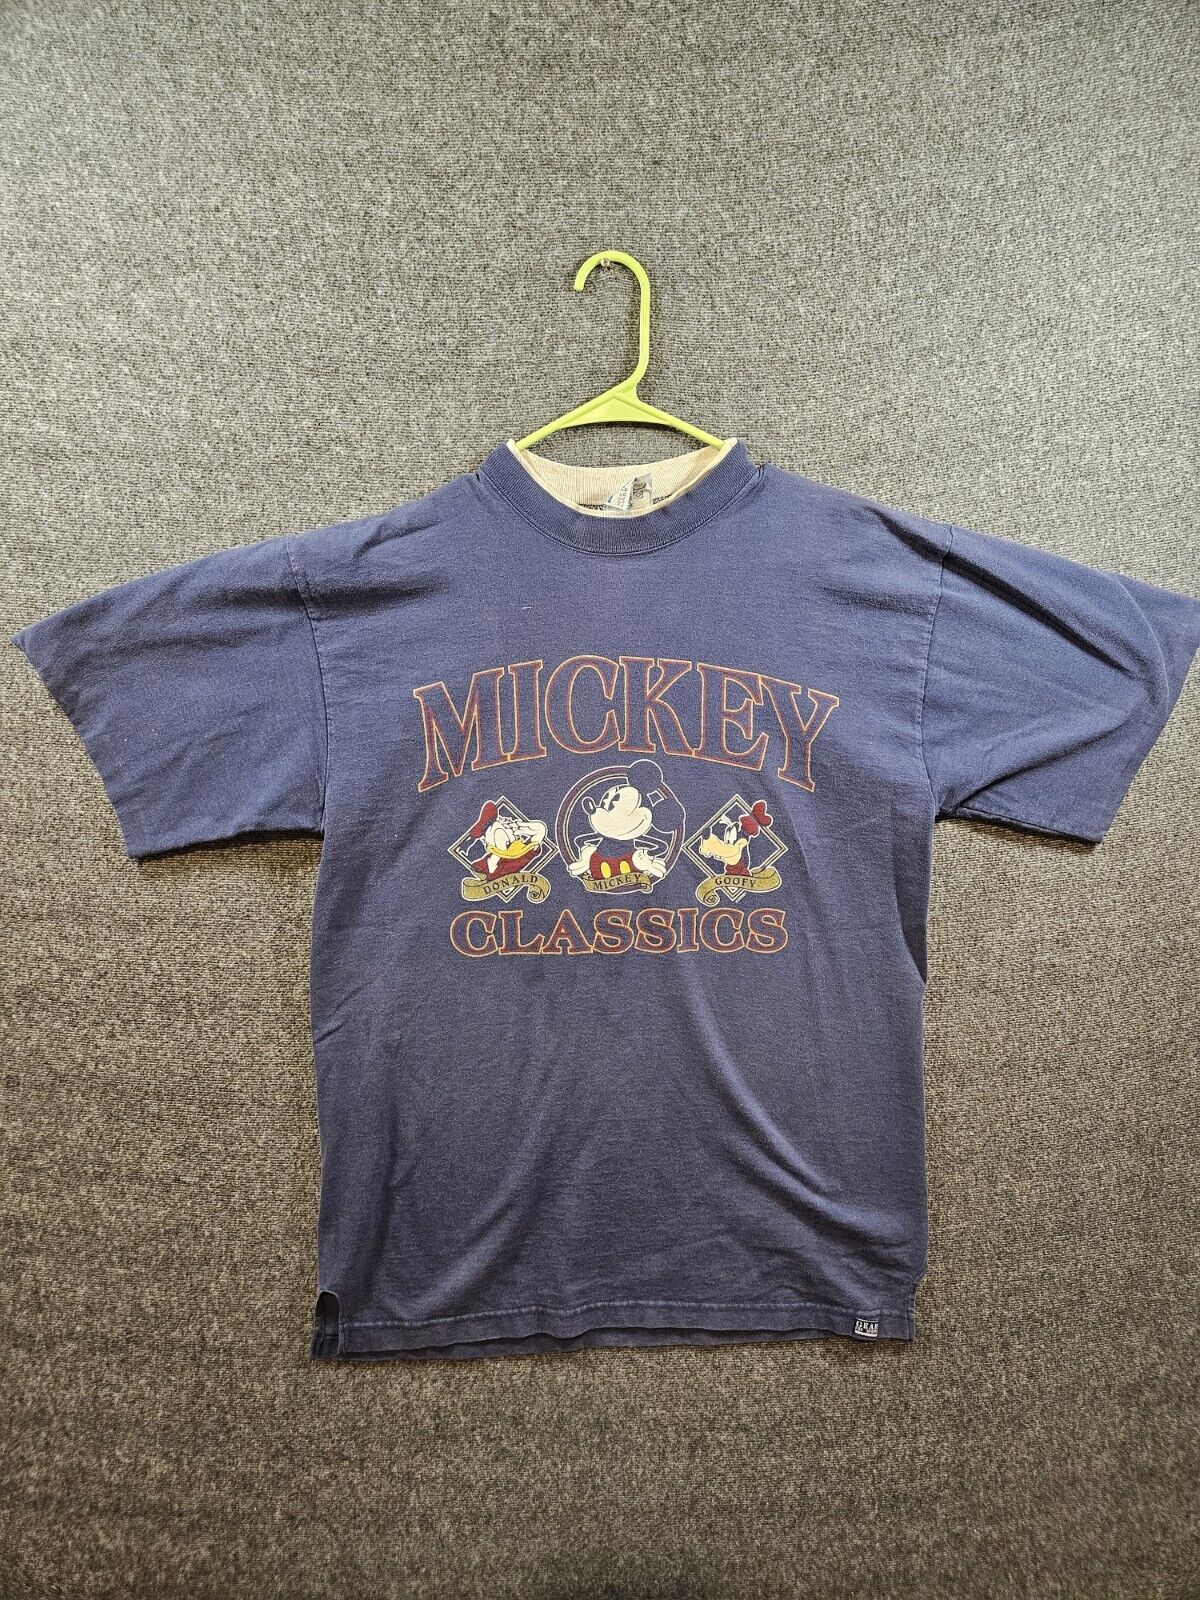 Vintage Mickey Classics T-Shirt 90s Gear For Sports Made In USA XL Used 